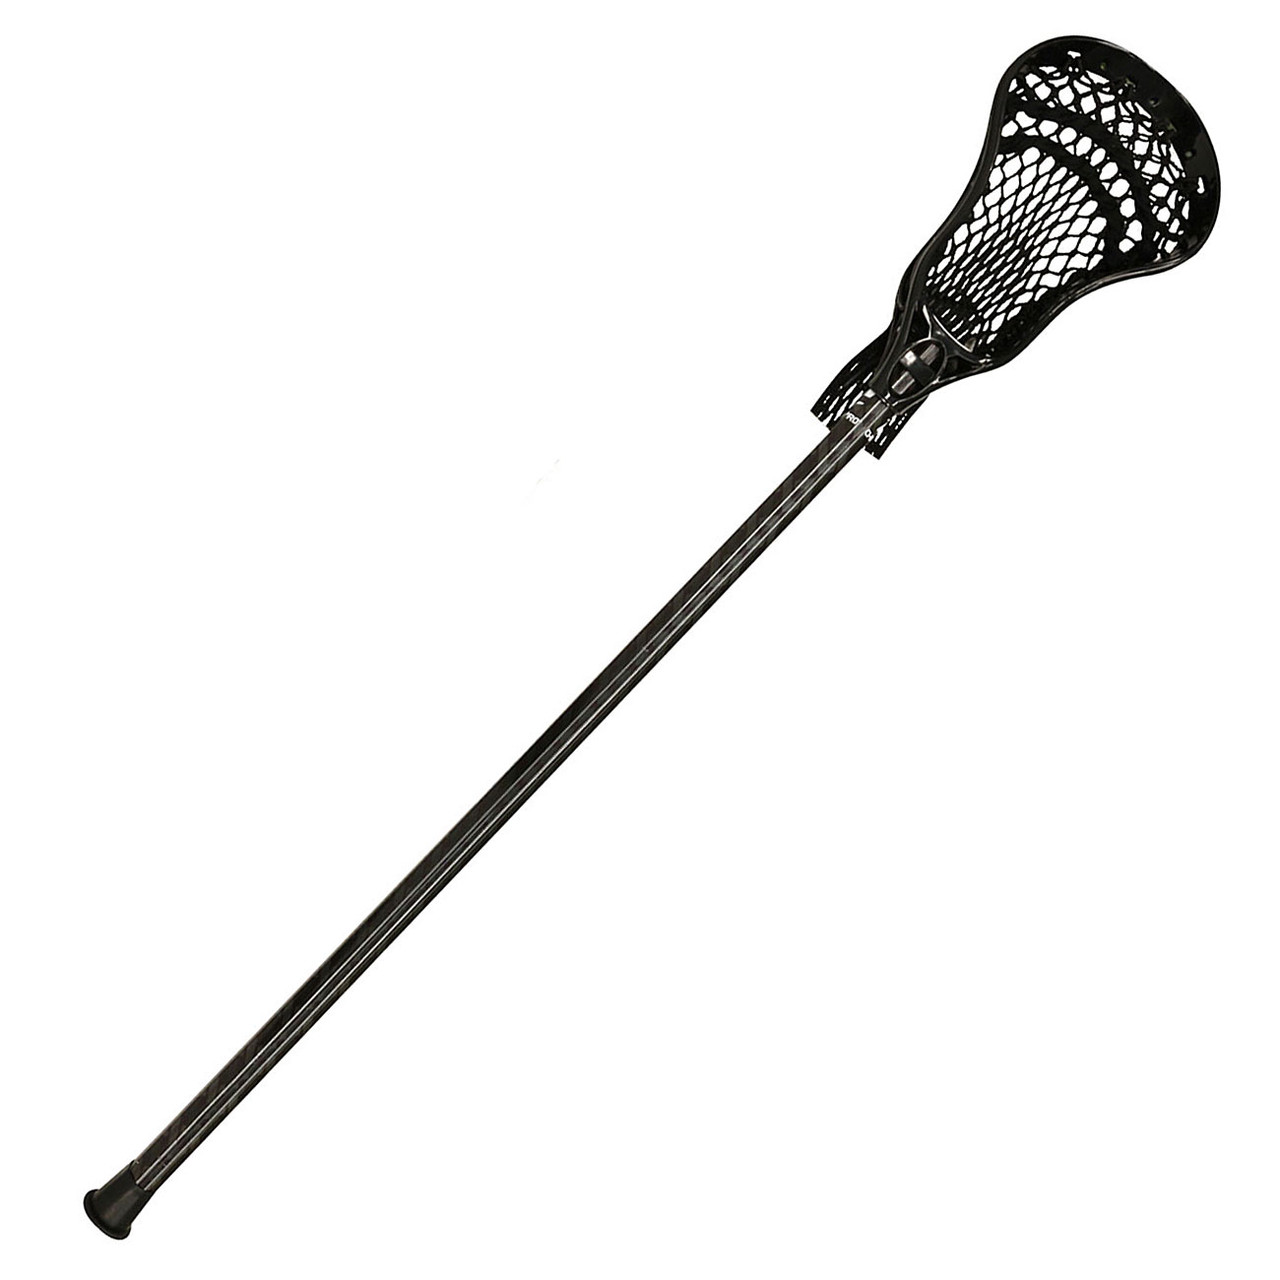 CHAMPRO Lacrosse Stick with Lightweight and Responsive Design for Youth  Athletes